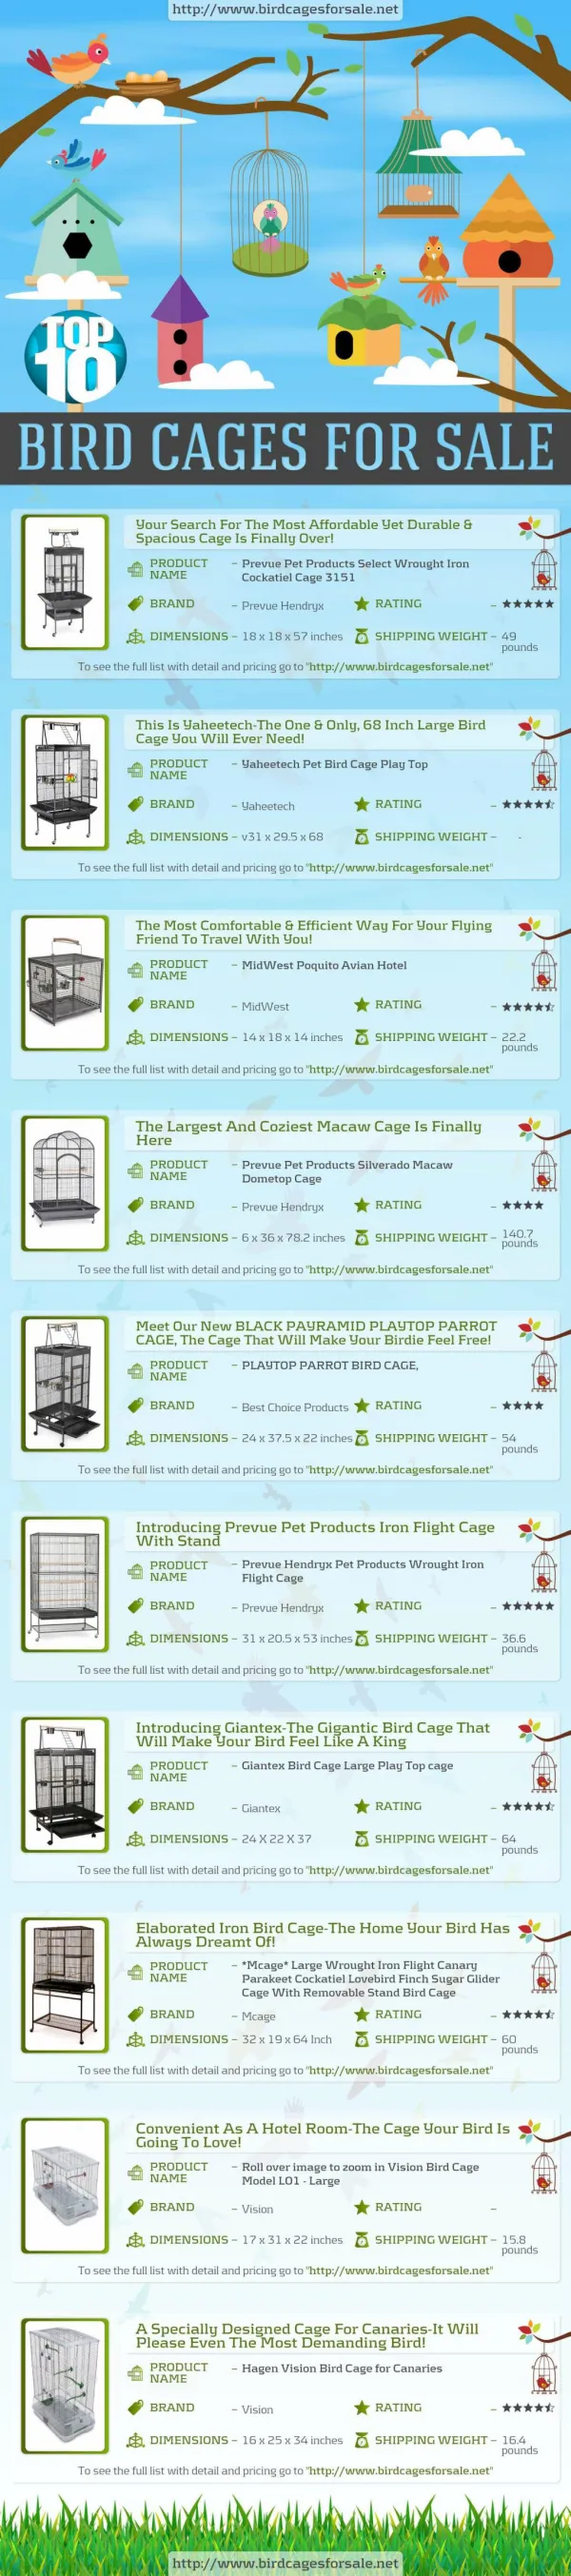 Top 10 Bird Cages For Sale